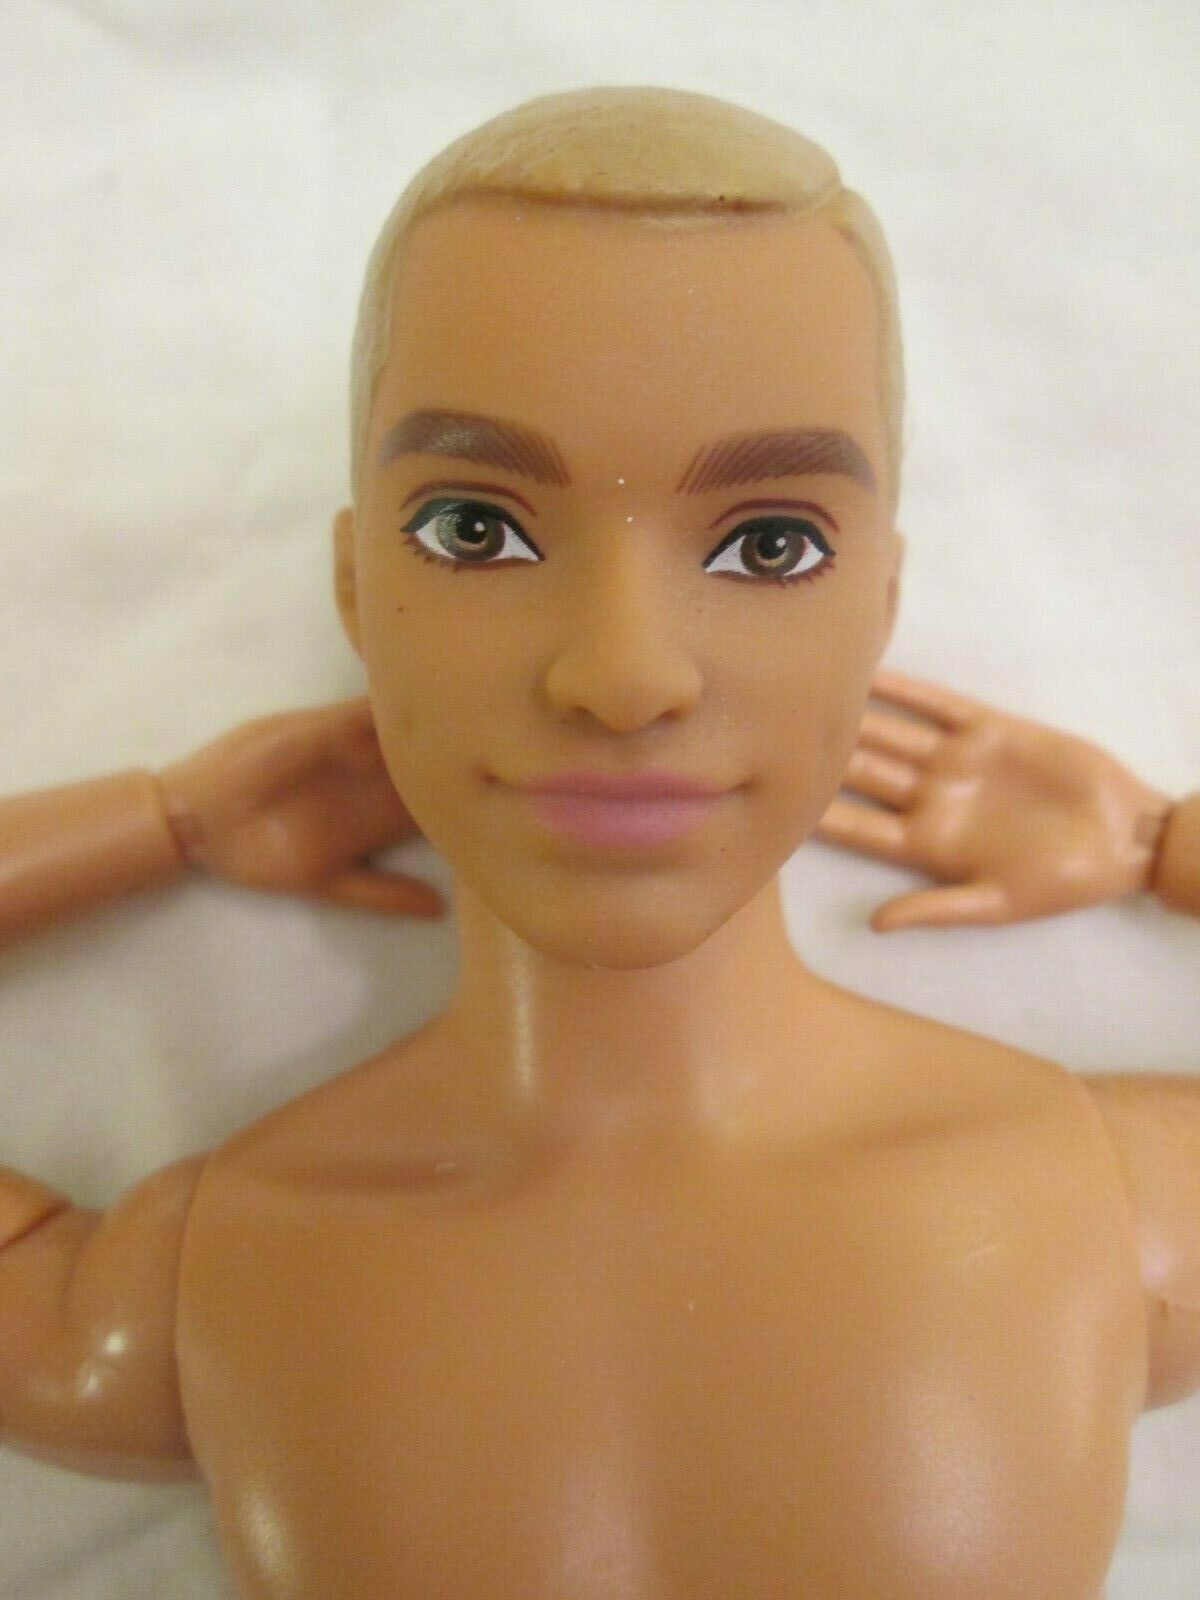 Barbie Fashionistas 163 Made To Move Hybrid Ken Doll Sculpted Blonde Hair Joints